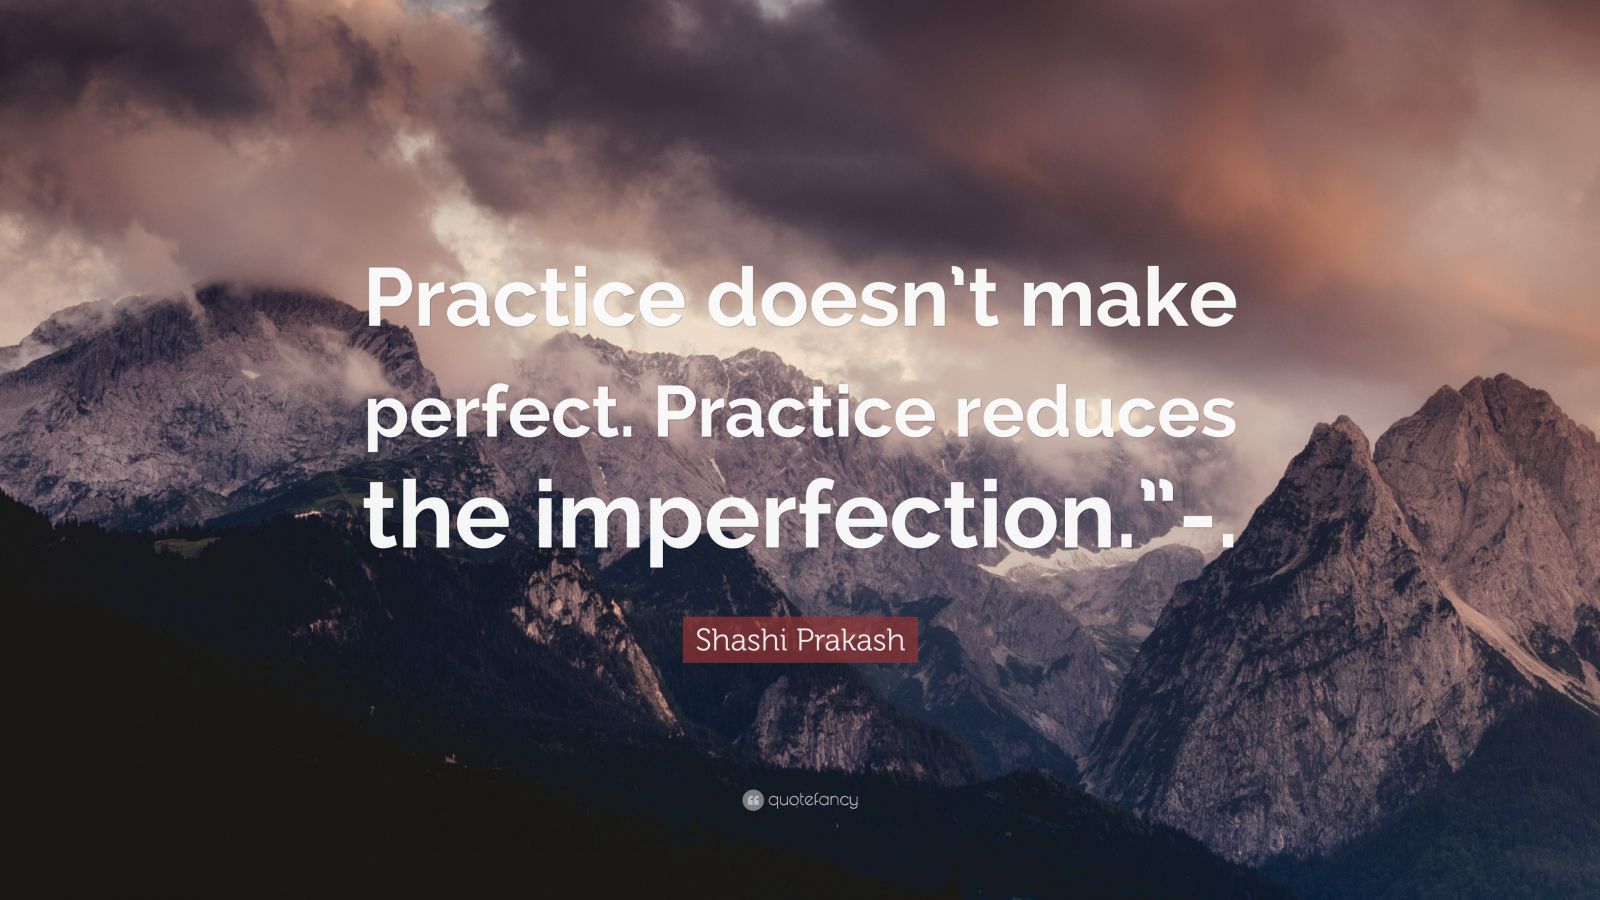 Comment: Practice does not make perfect